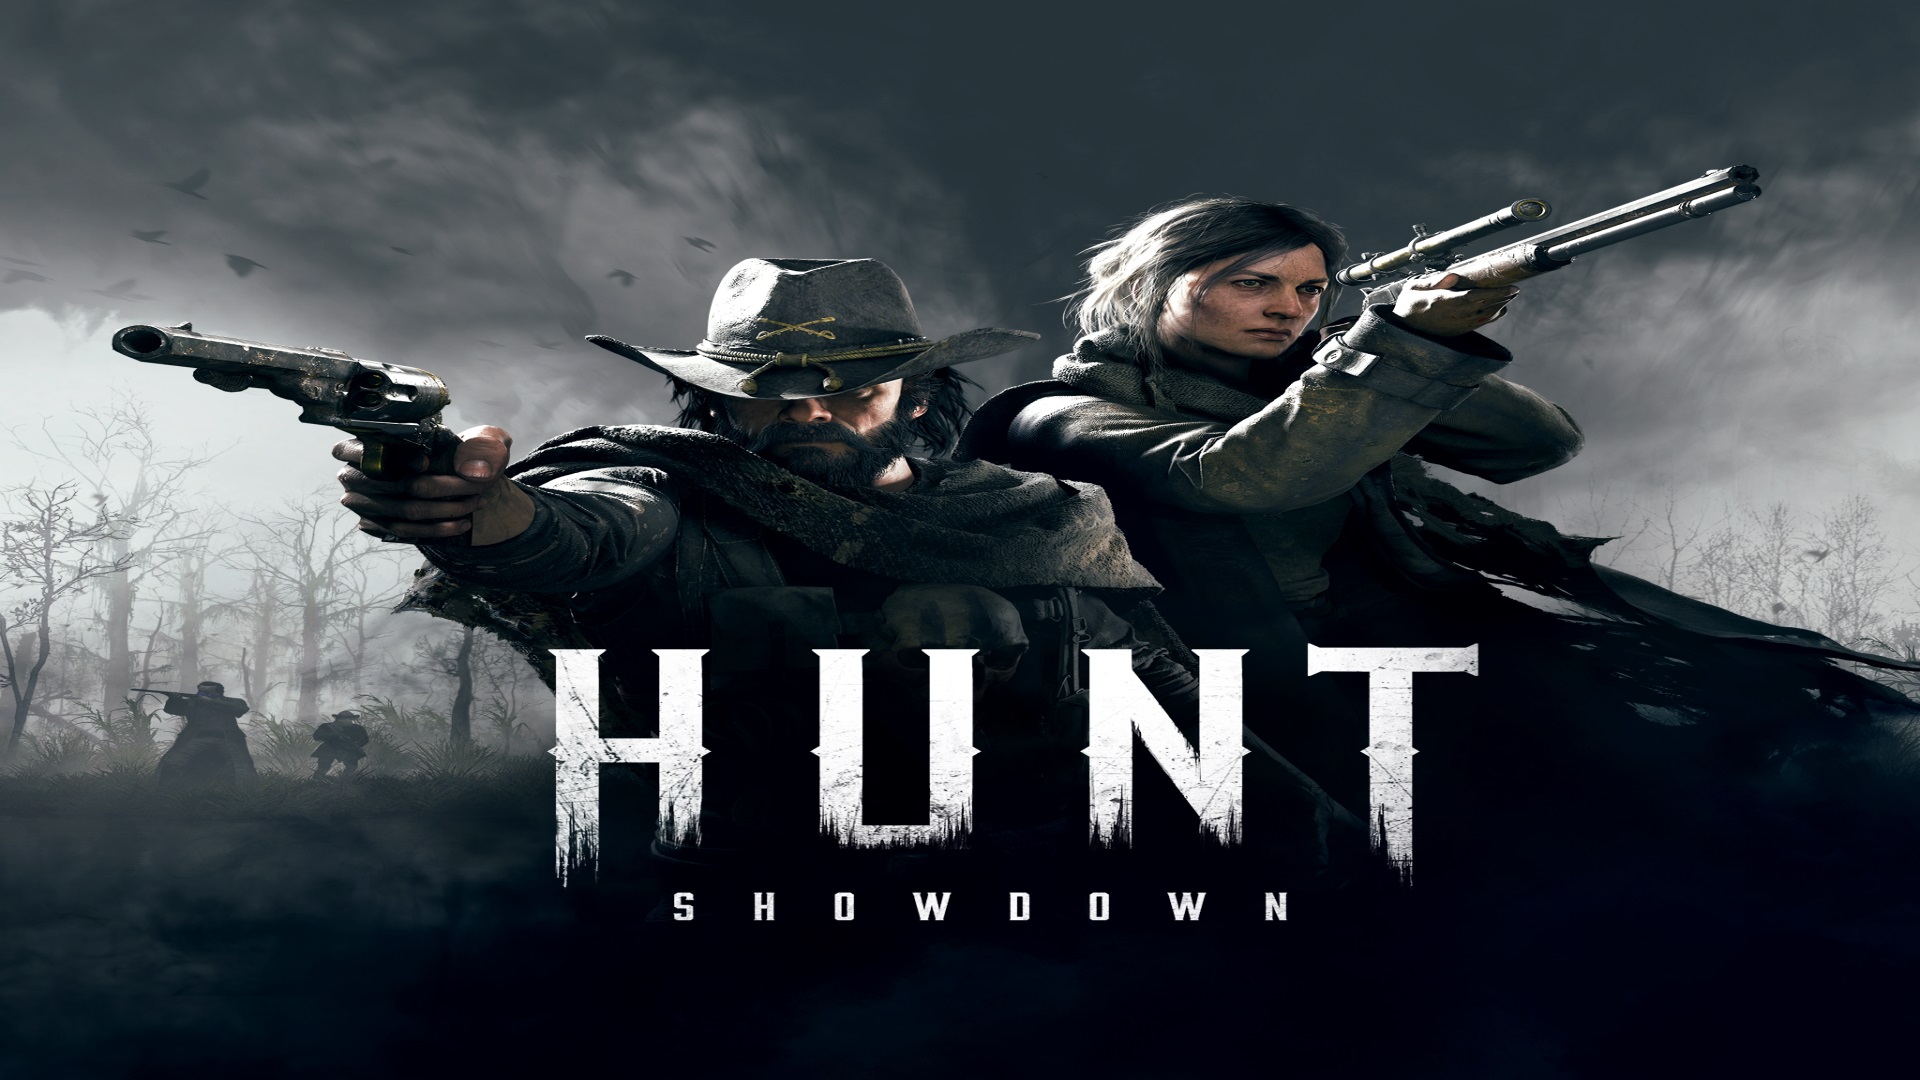 Upcoming content and release date announced for Hunt: Showdown Online ...